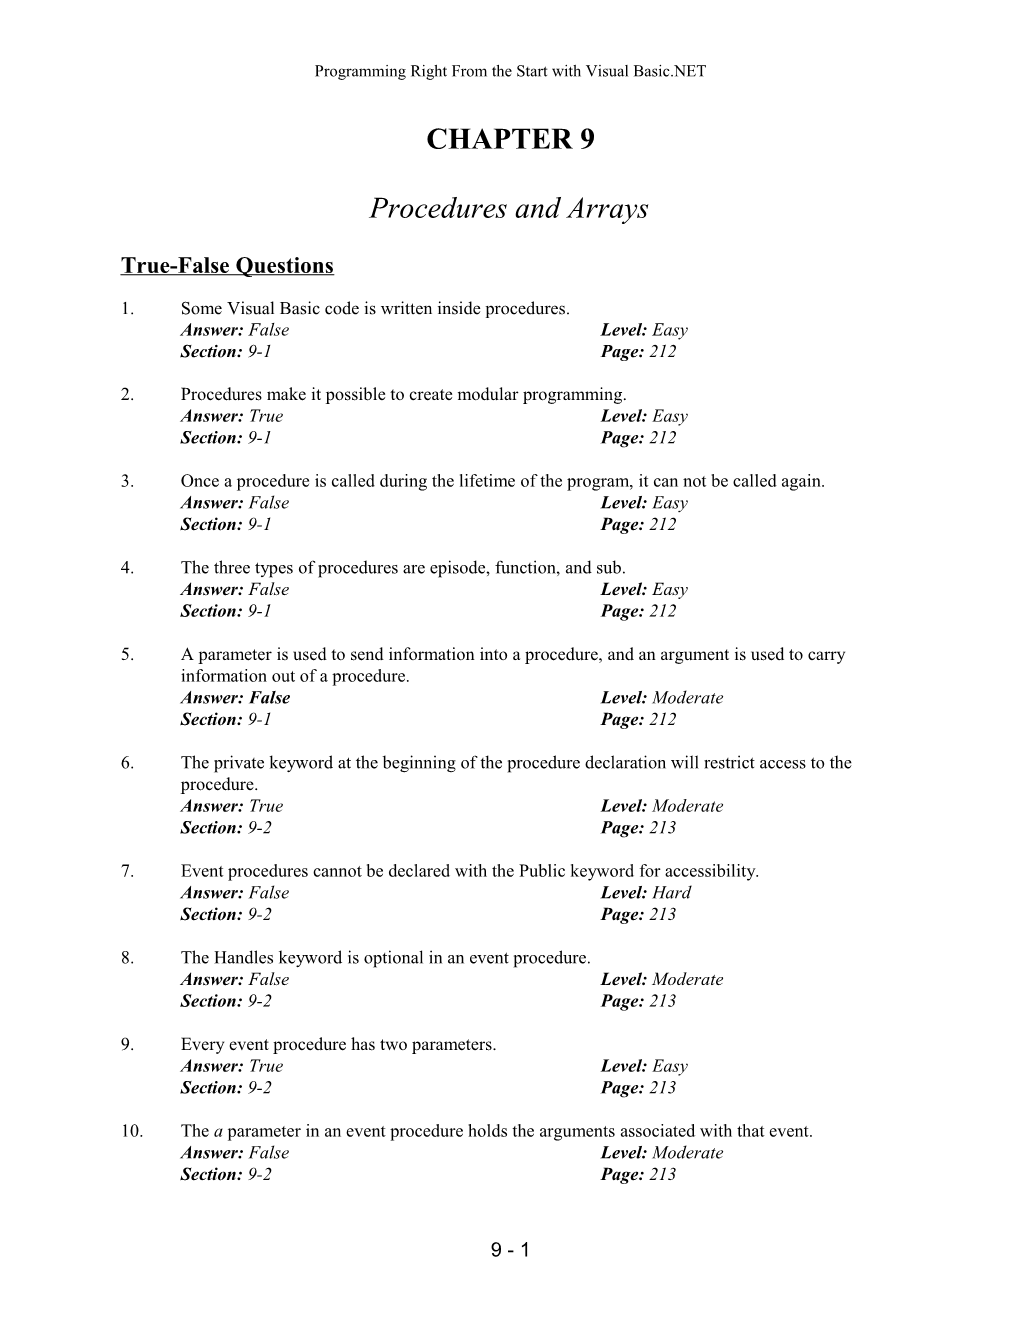 Chapter 9 Procedures and Arrays